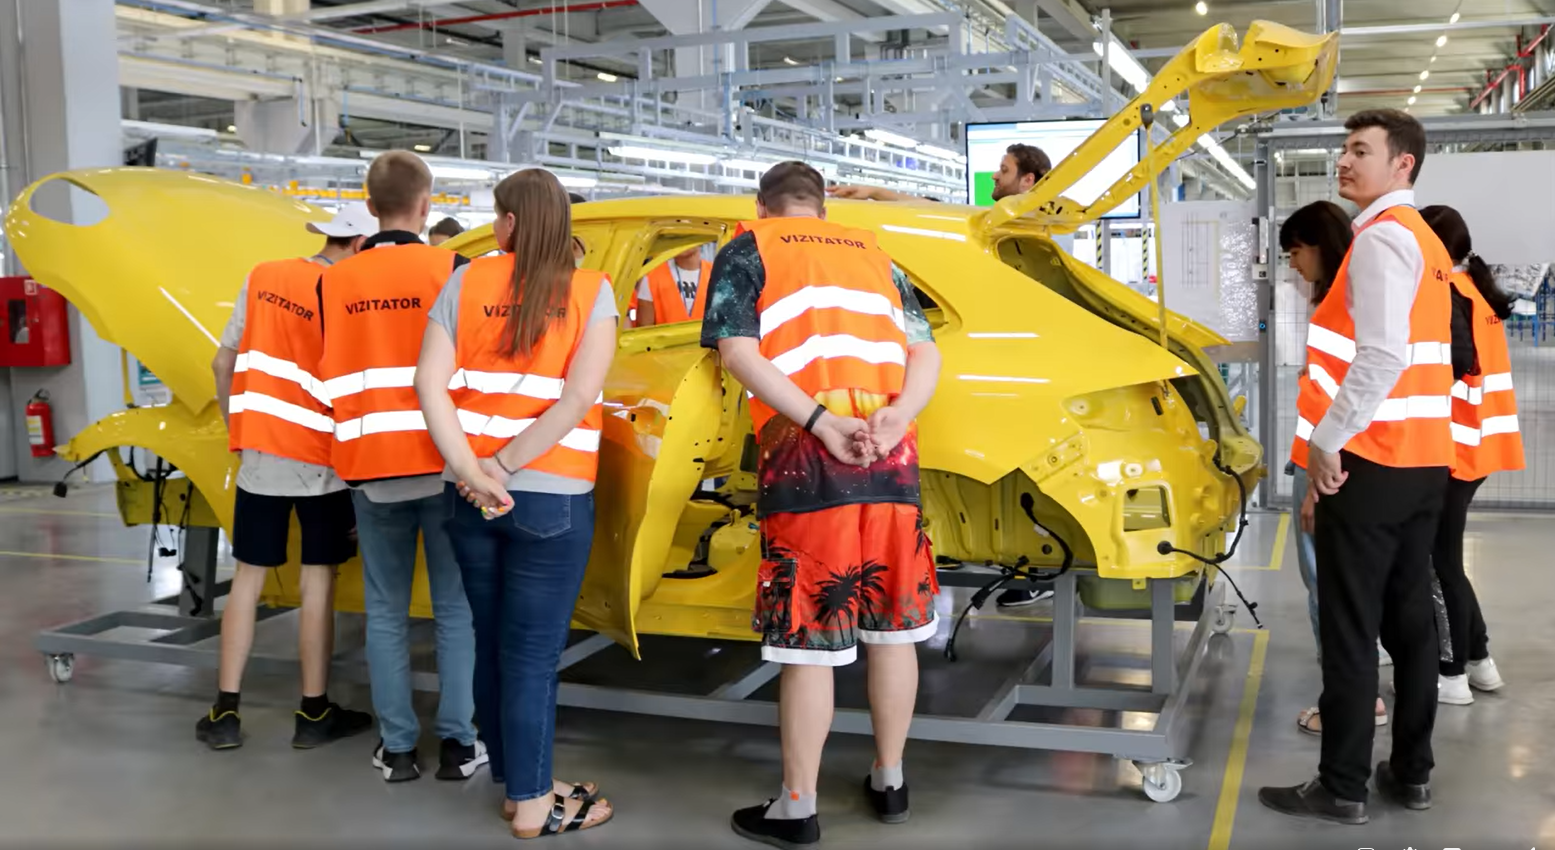 Students’ visit to the DRÄXLMAIER factory in Cahul